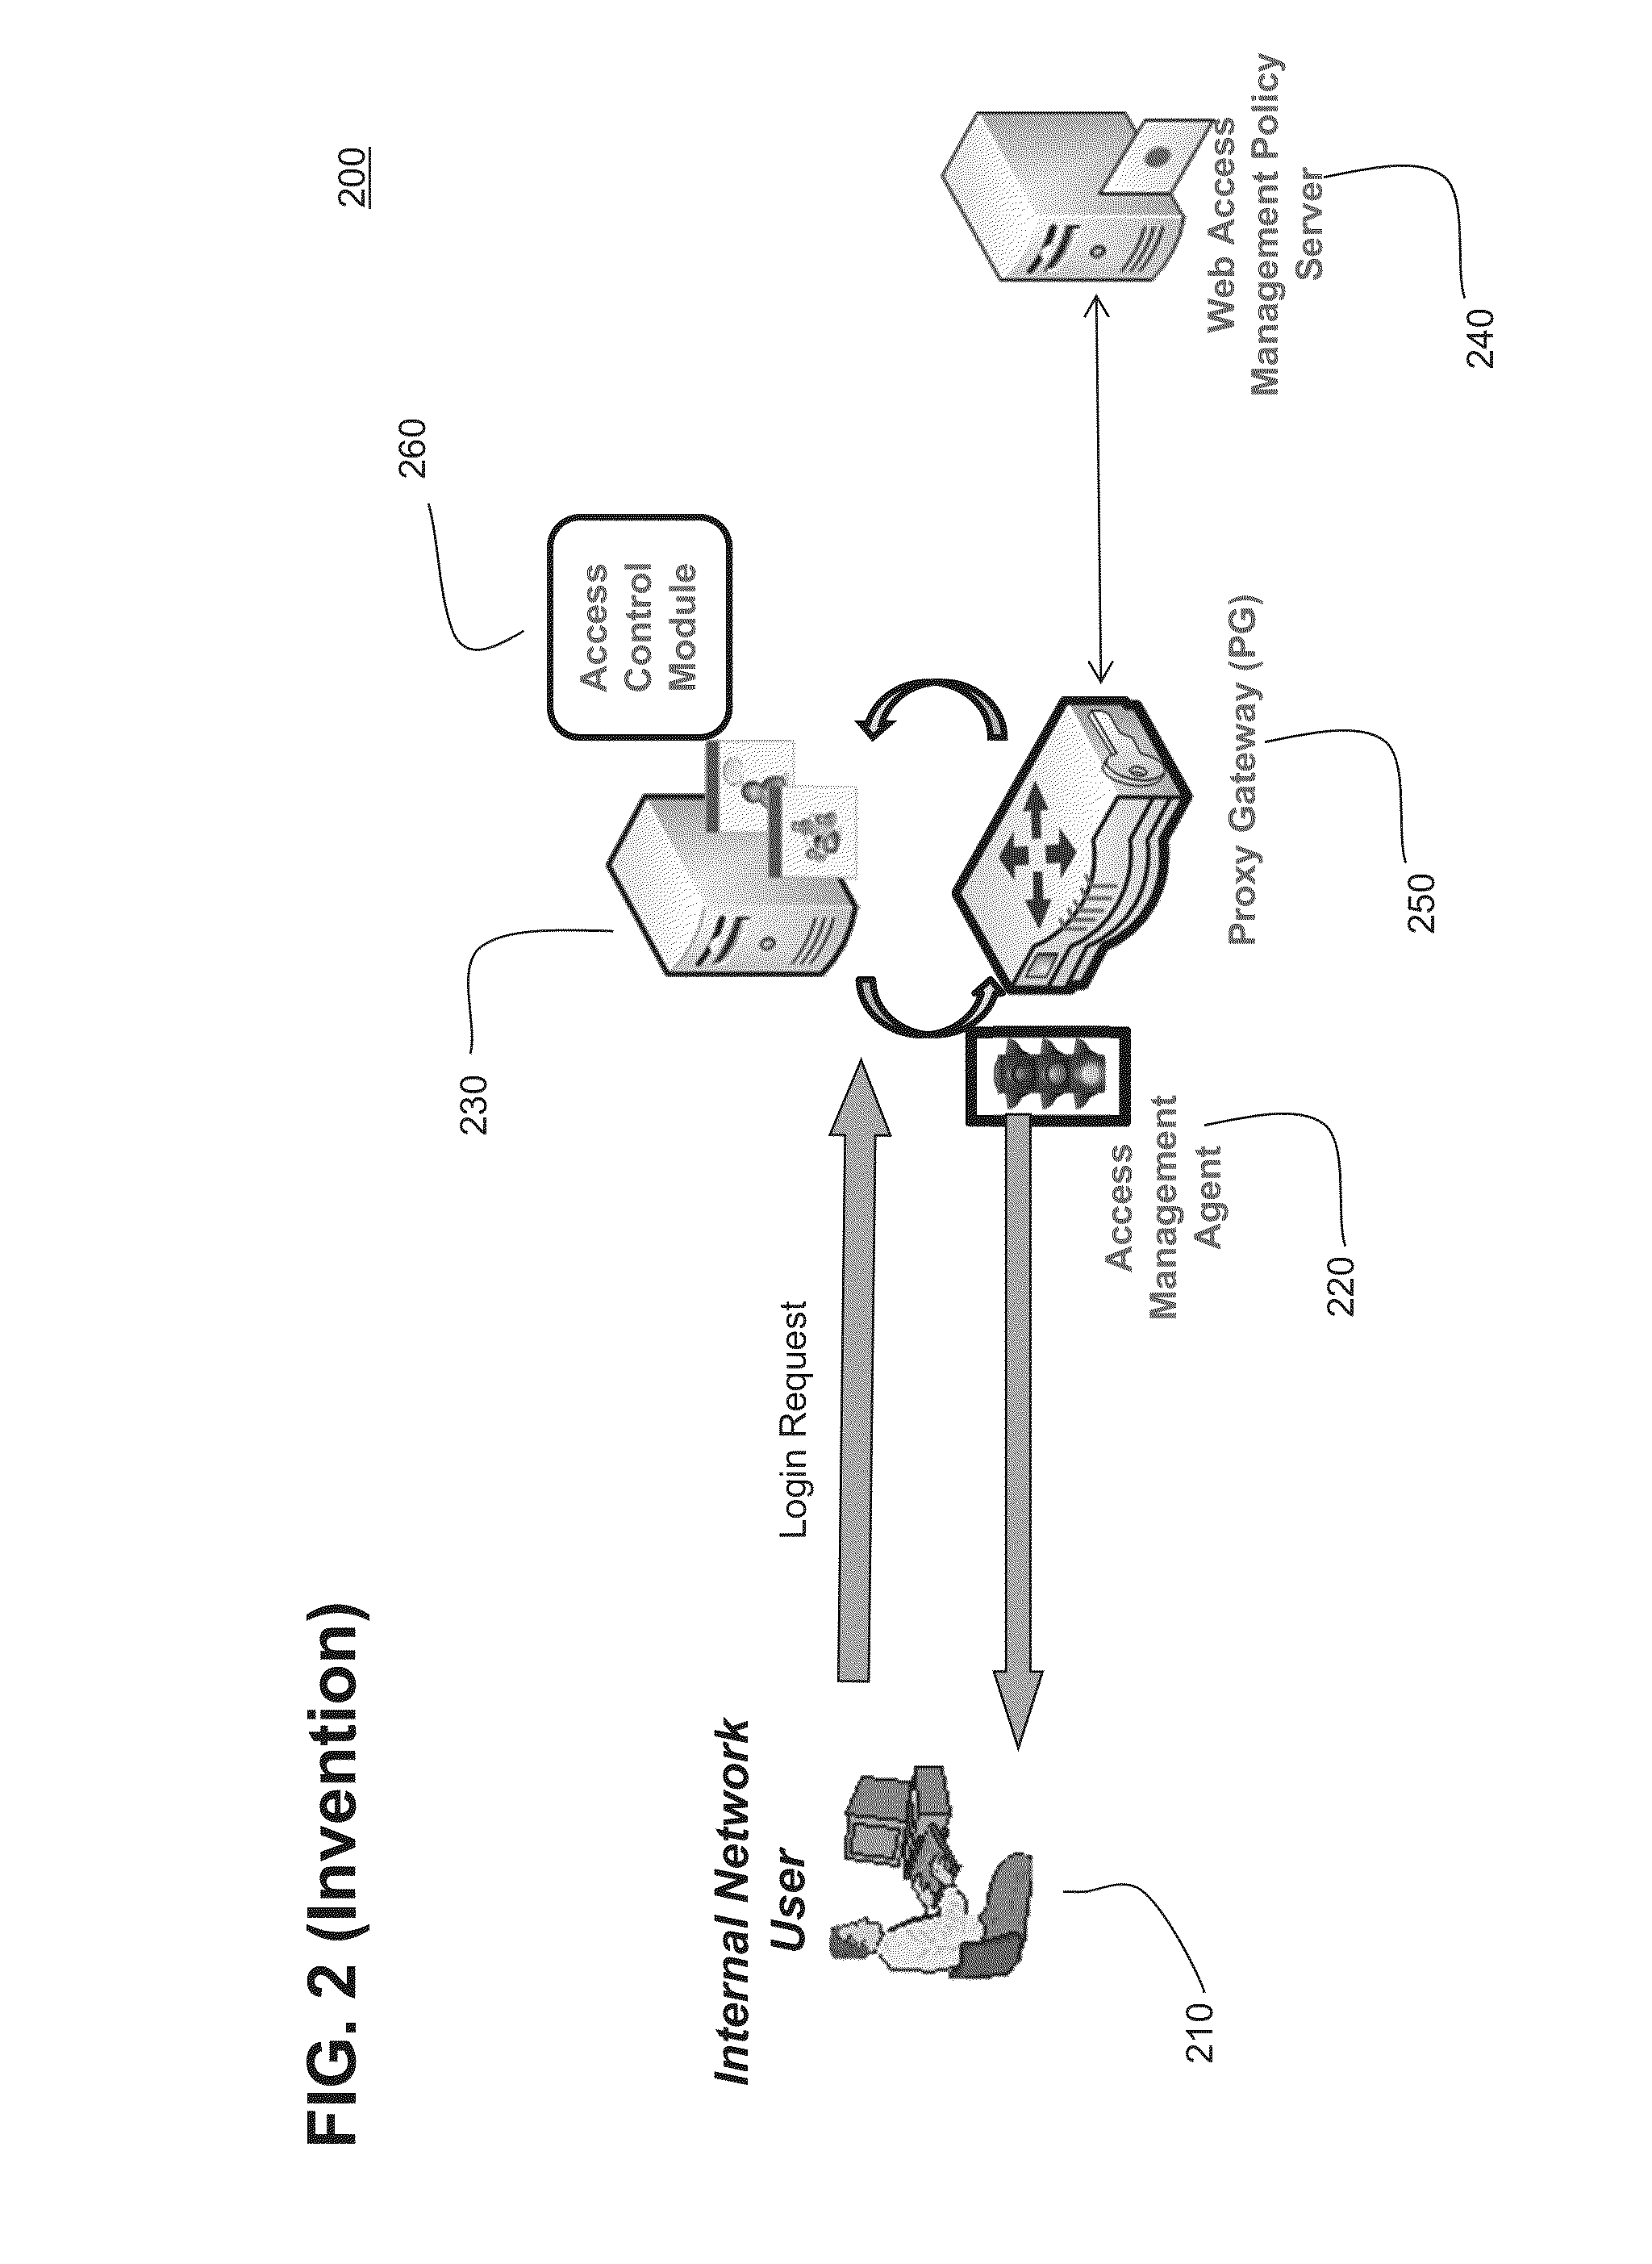 System and Method for Providing Access to a Software Application